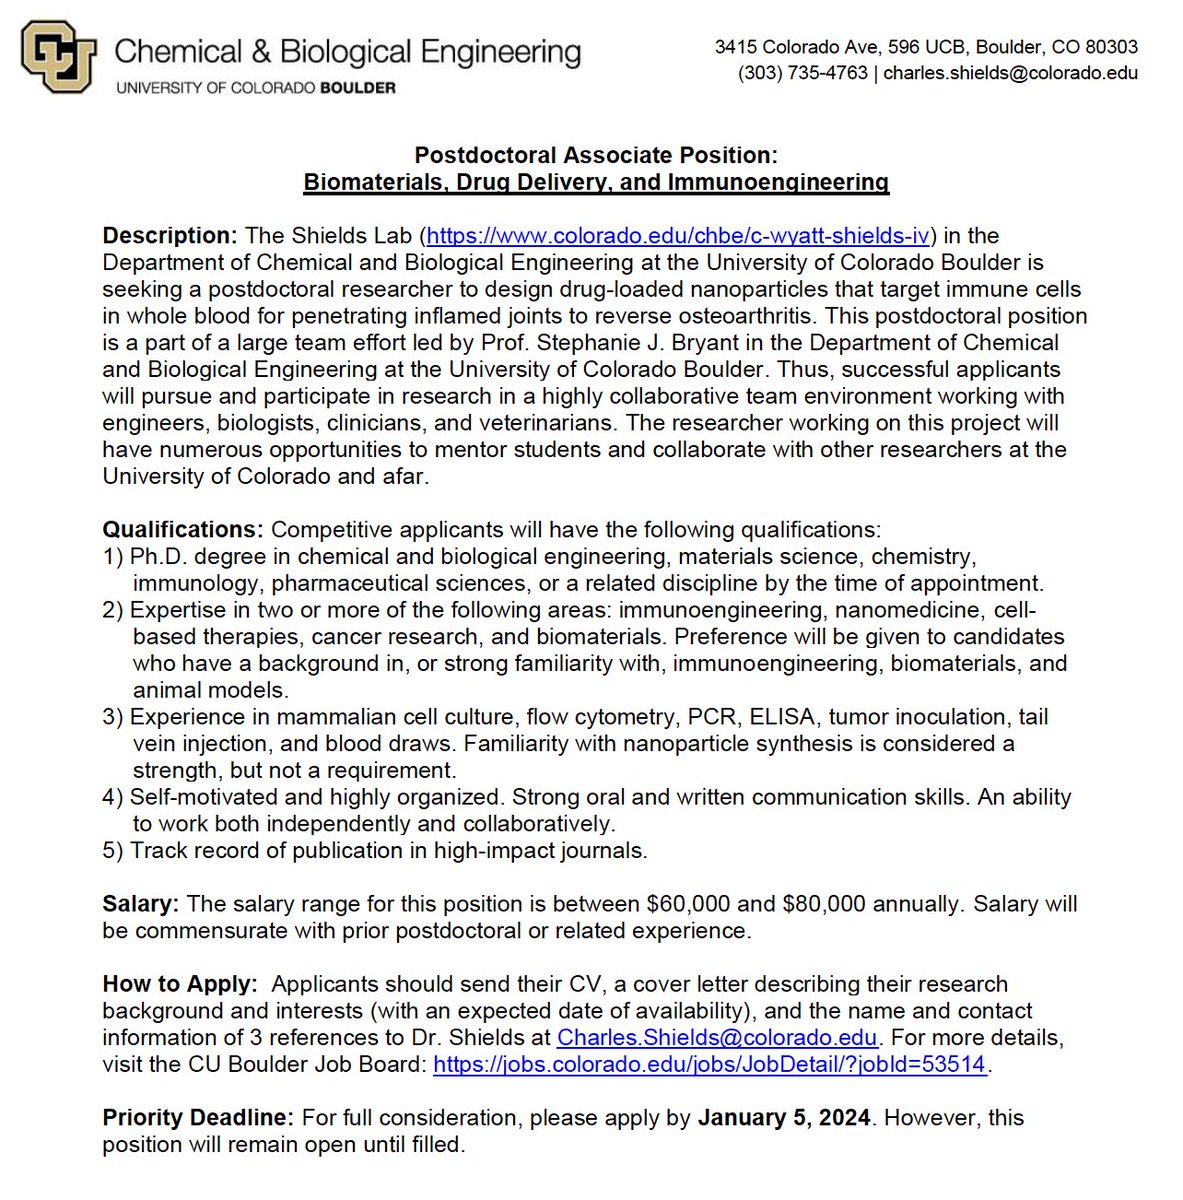 We're hiring! 🚨 My group has a new postdoc position (with reasonable pay) in cell-targeting biomaterials for reversing osteoarthritis as a part of a large collaborative effort @CUBoulder. Priority date is January 5. Email me directly if interested. RTs appreciated! 🙏